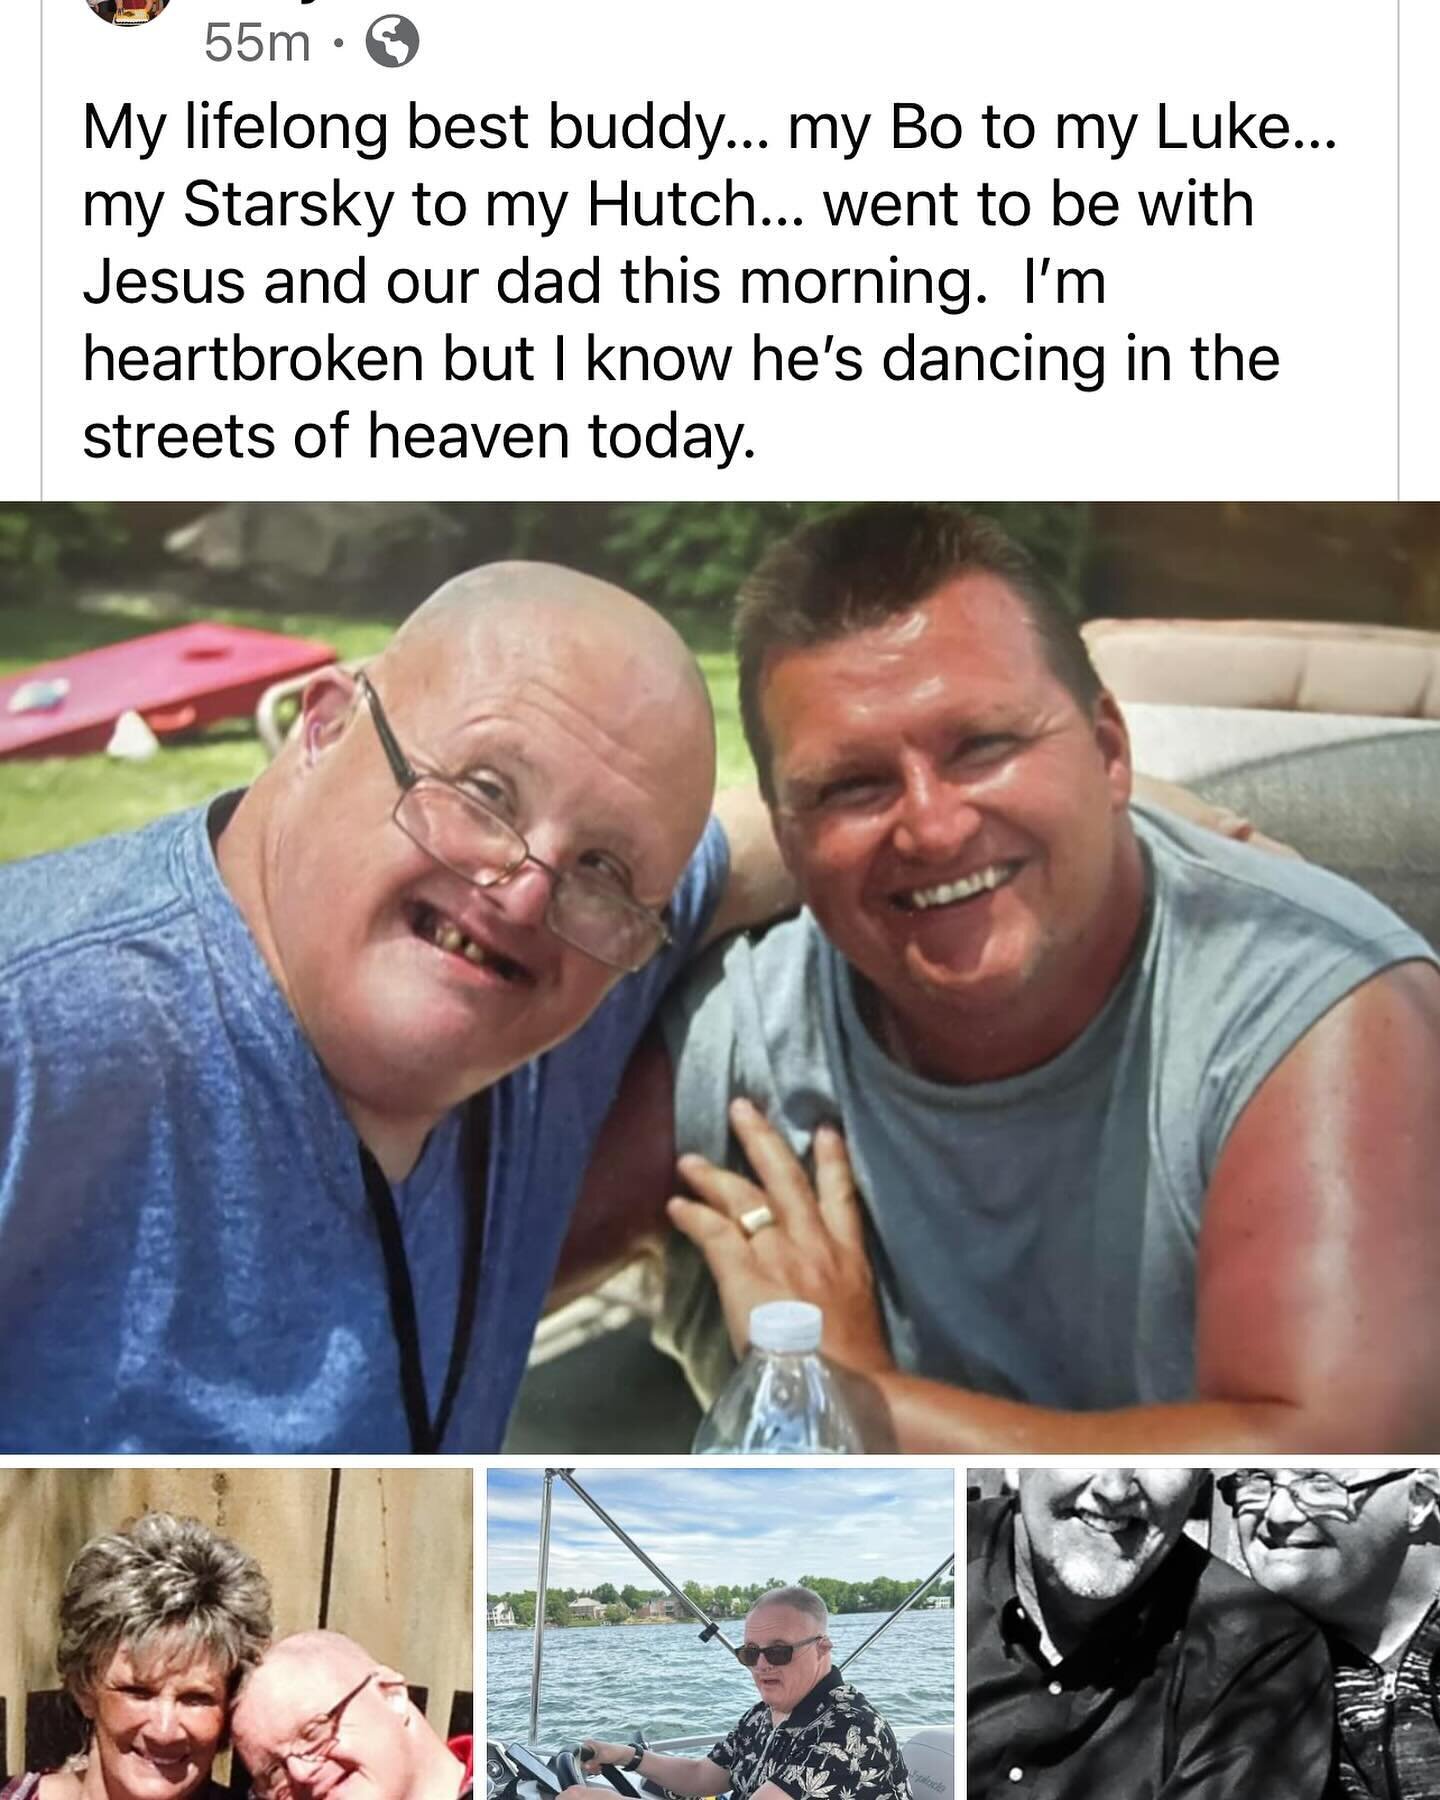 This is my husband&rsquo;s FB post. My brother in law passed today. With Down&rsquo;s Syndrome he was never expected to live this long! We&rsquo;re grateful we got to enjoy him as long as we did!